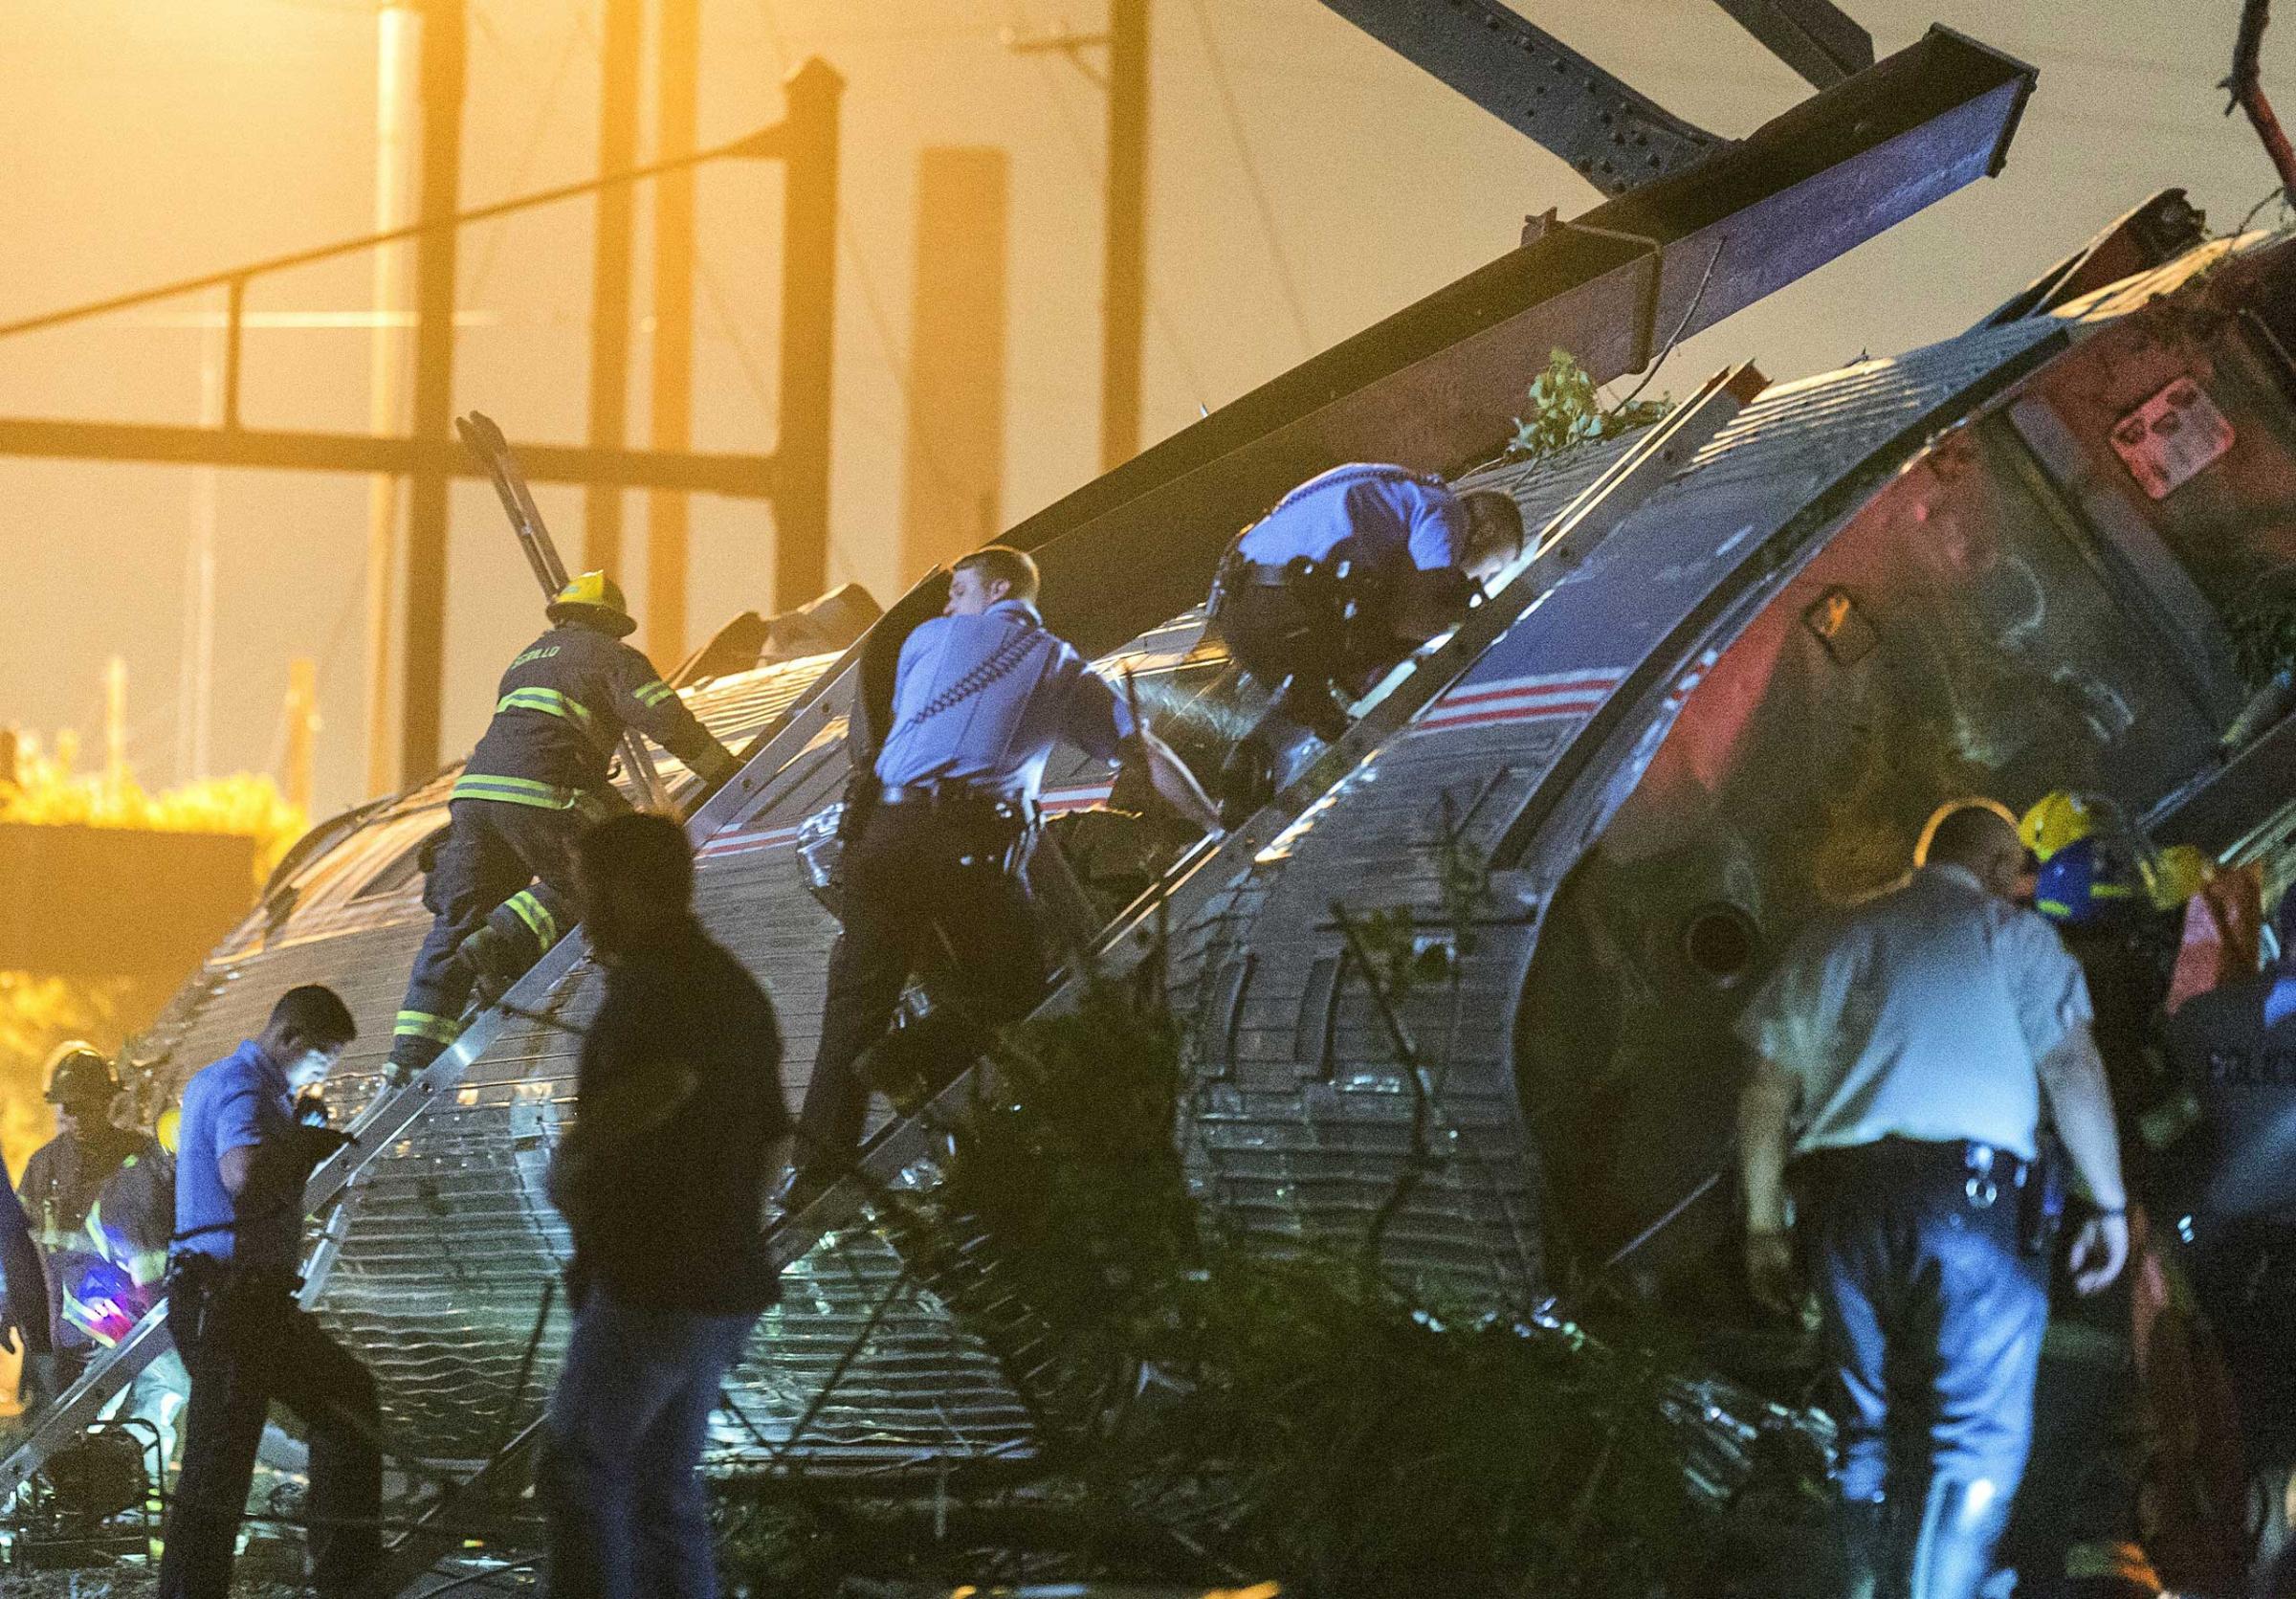 Rescue workers climb into the wreckage of a derailed Amtrak train to search for victims in Philadelphia on May 12, 2015.